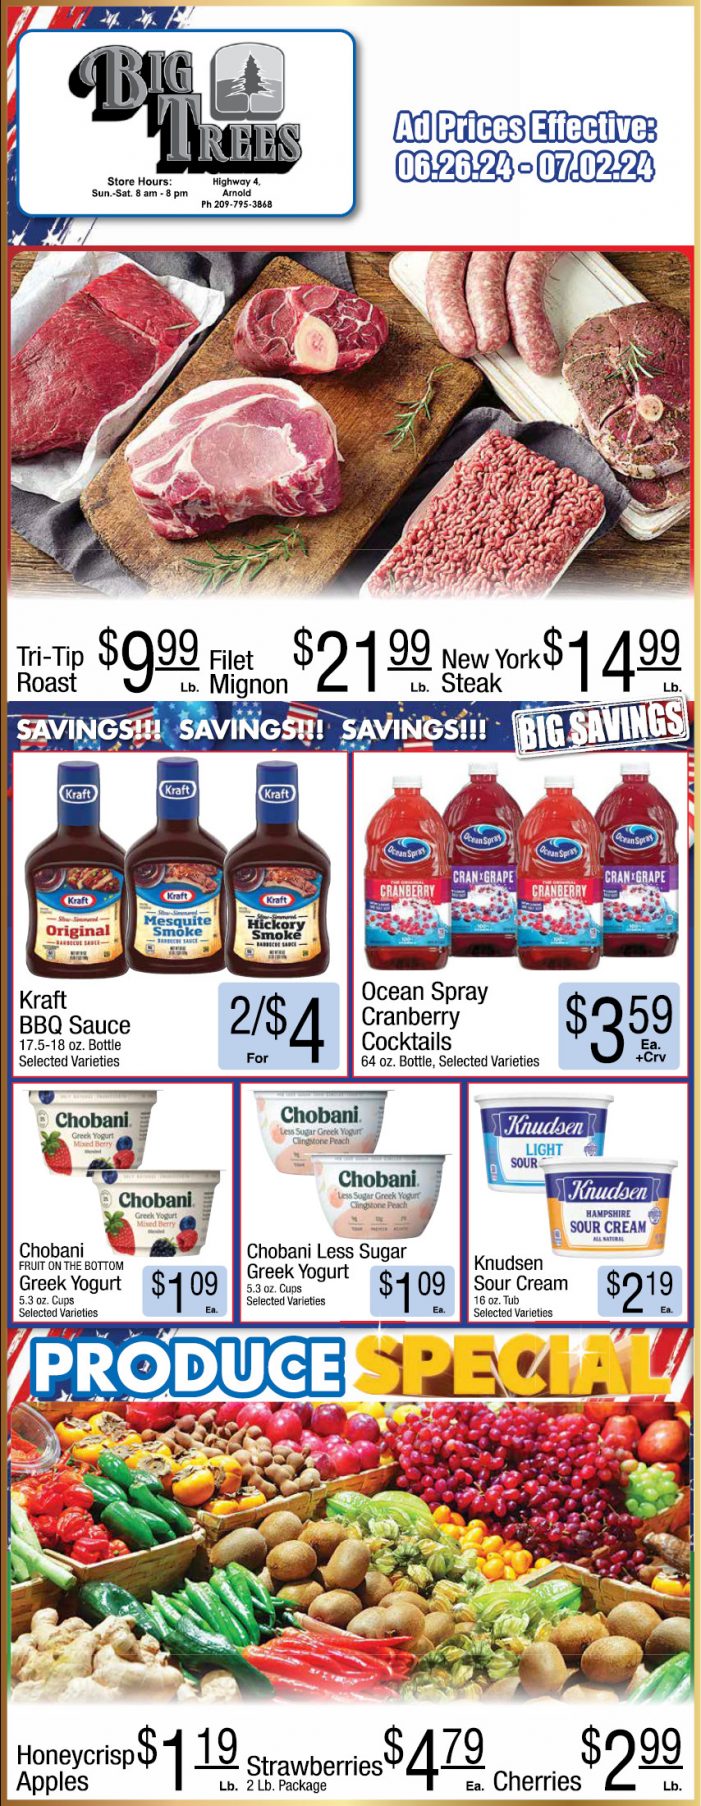 Big Trees Market Weekly Ad, Grocery, Produce, Meat & Deli Specials Through July 2nd! Shop Local & Save!